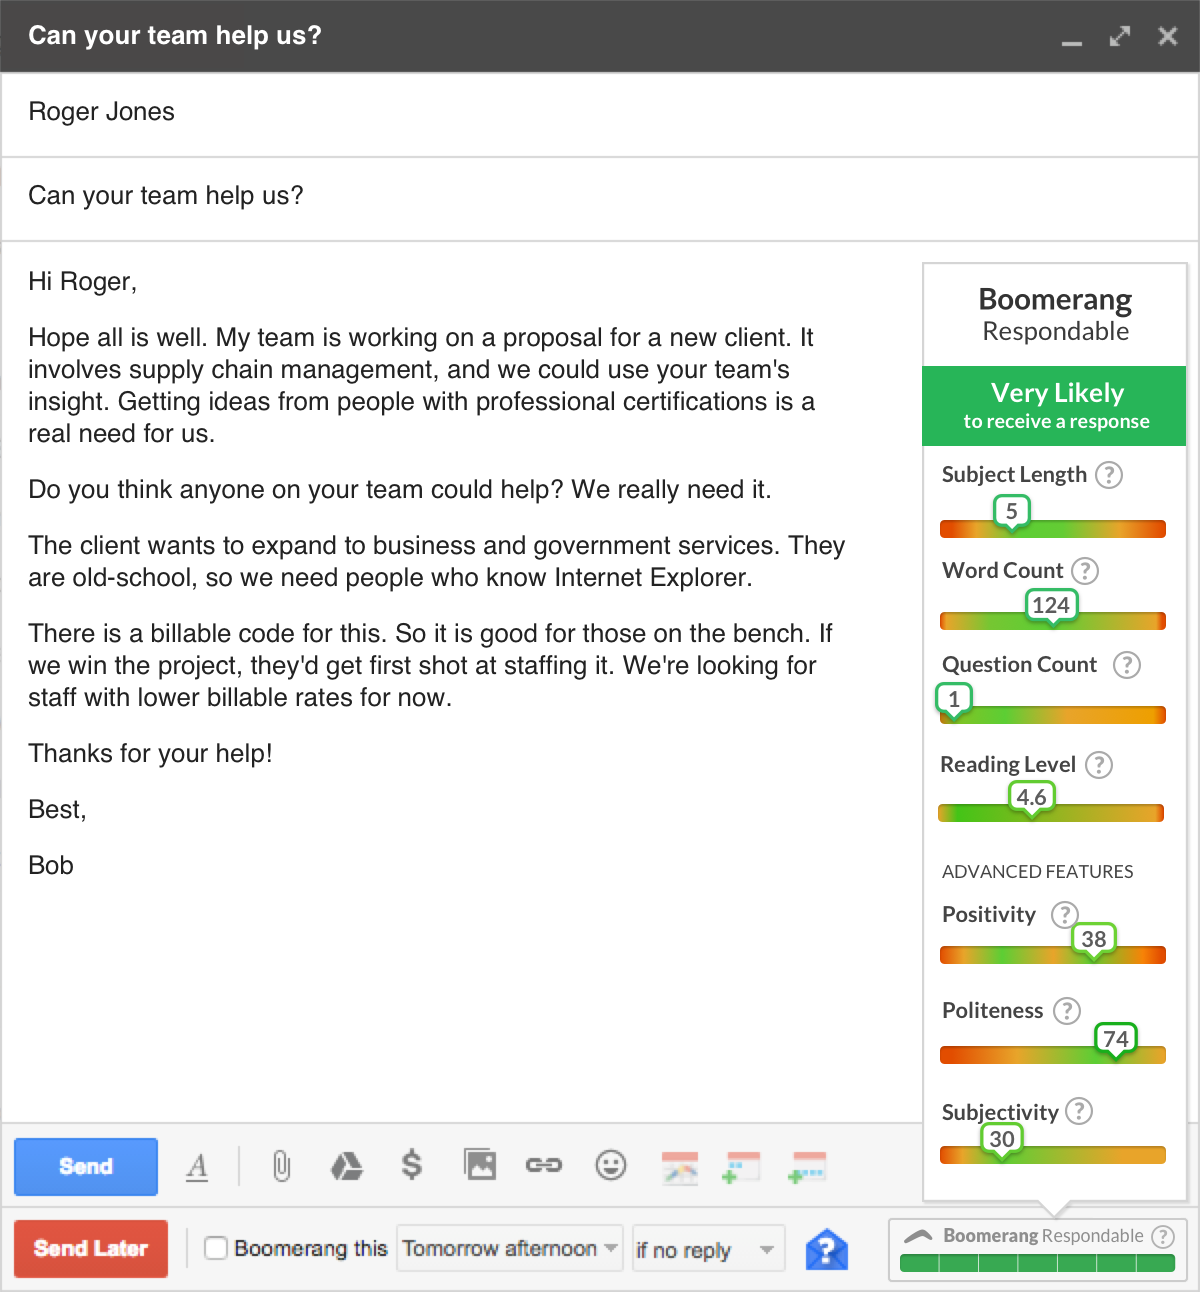 Boomerang’s Respondable Helps You Craft An Email That Will Actually Get A Reply